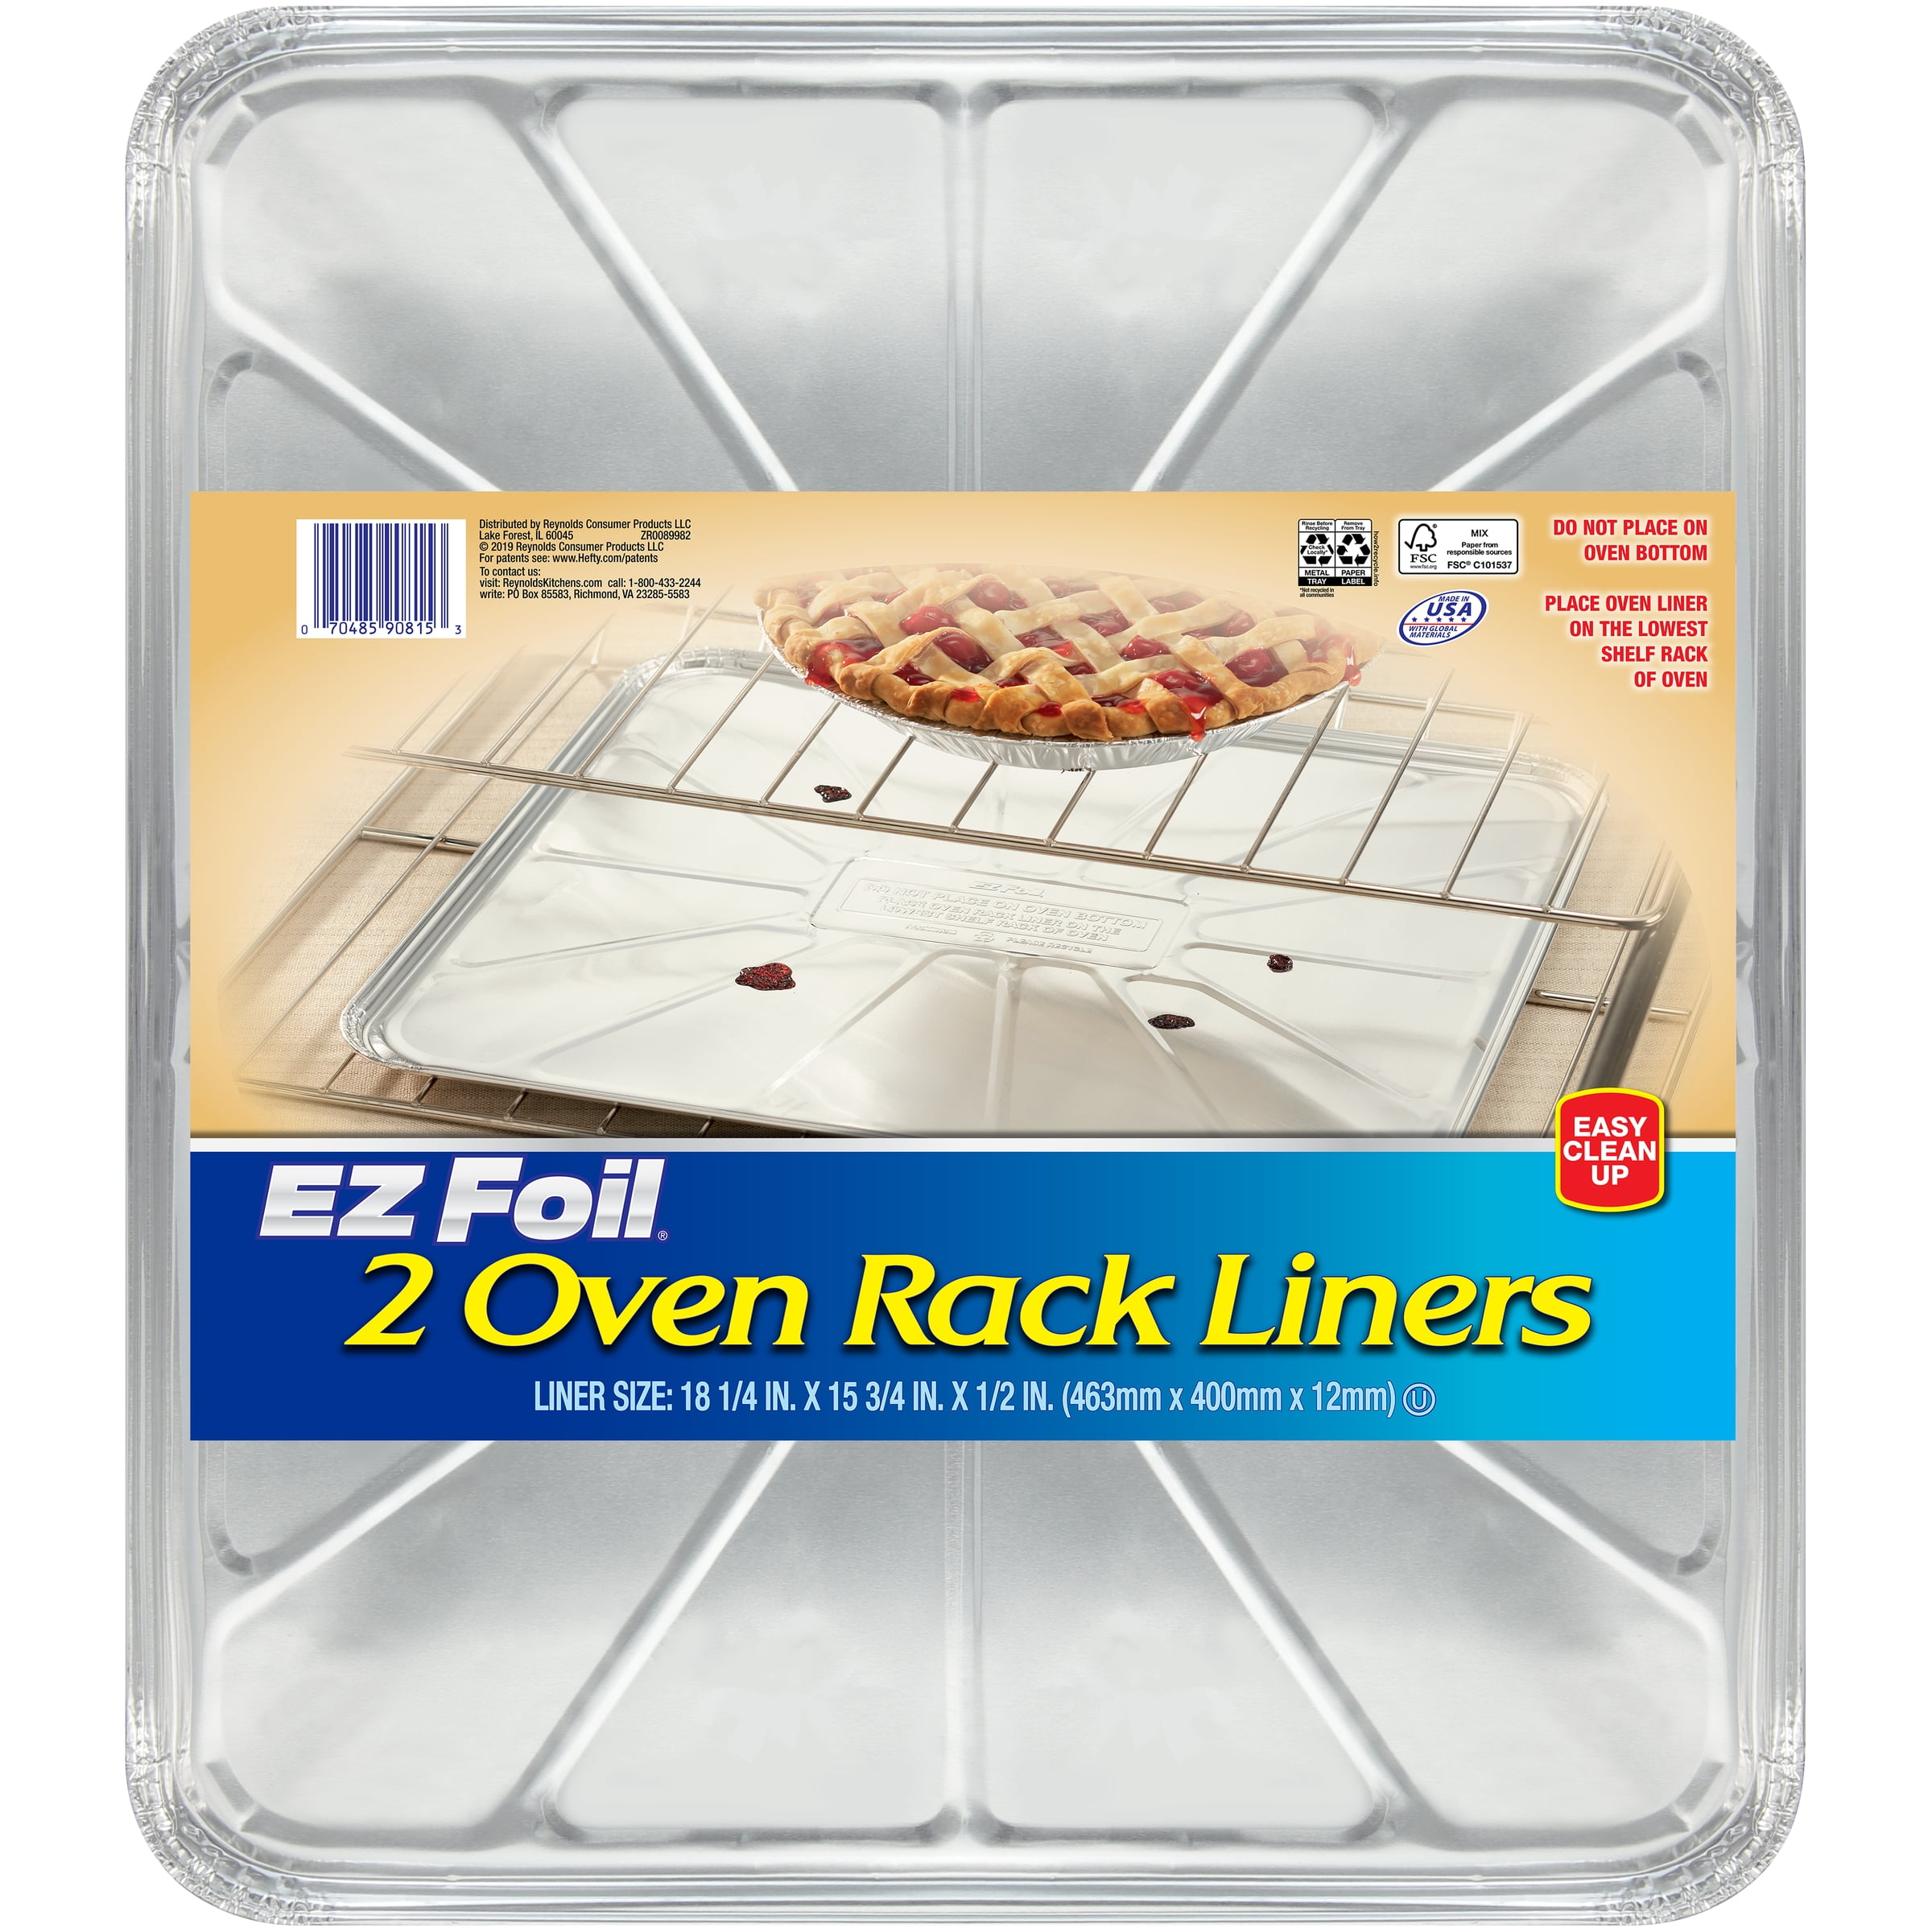 Hefty EZ Foil Oven Rack Liner Tray, 18-1/4 x 15-3/4 x 1/2 inches, 2 Count